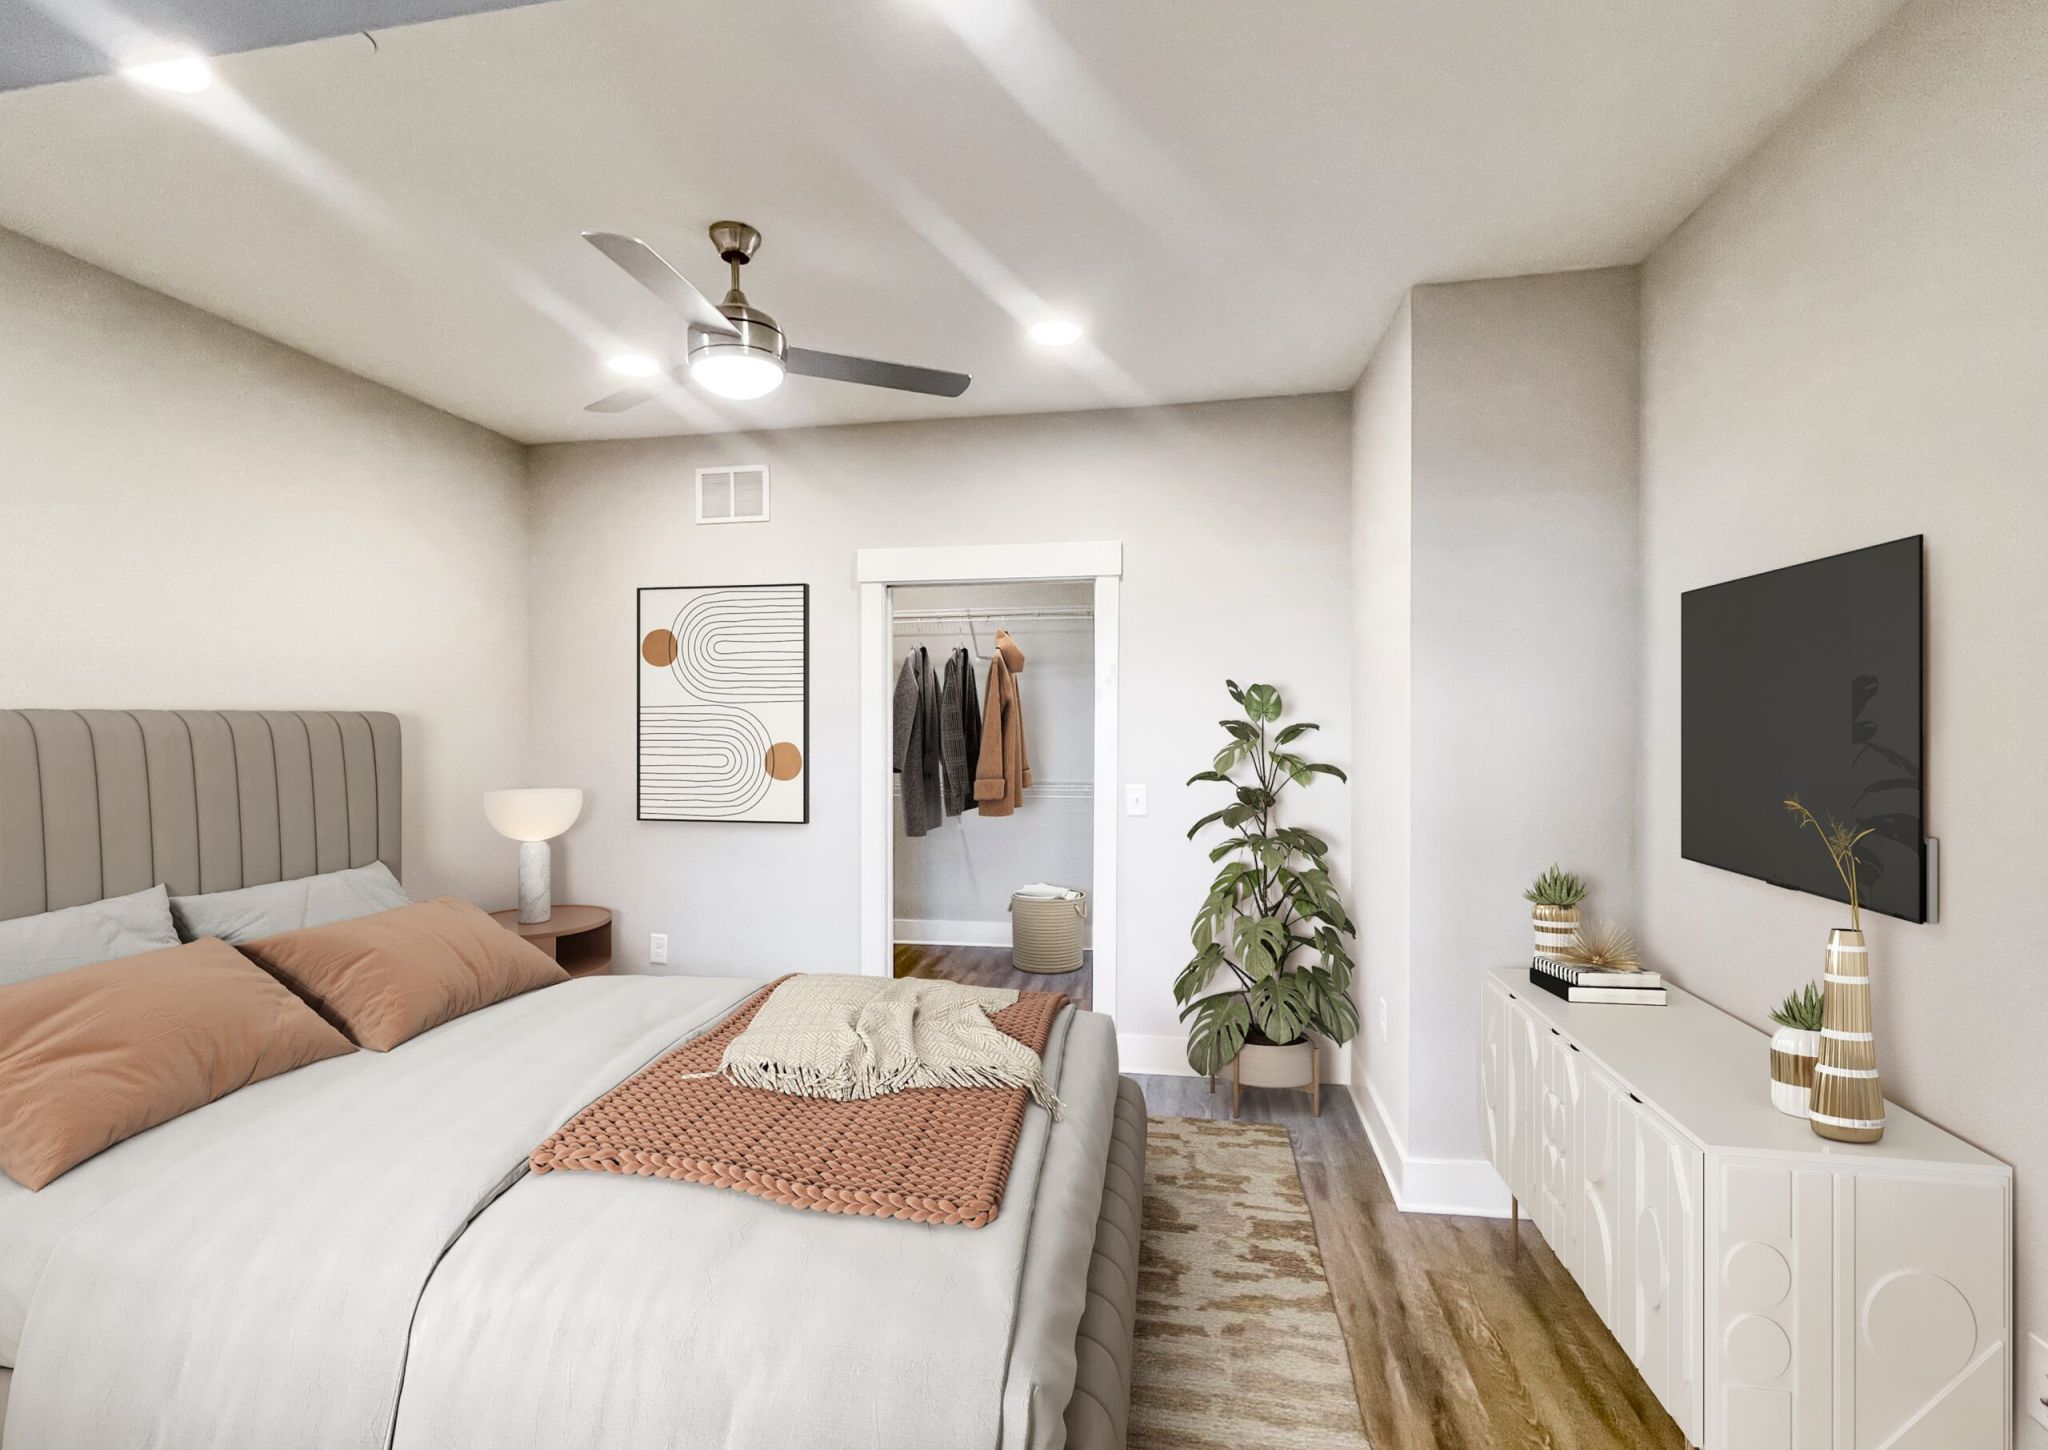 Apartment bedroom with large bed, indoor plant, closet, and ceiling fan